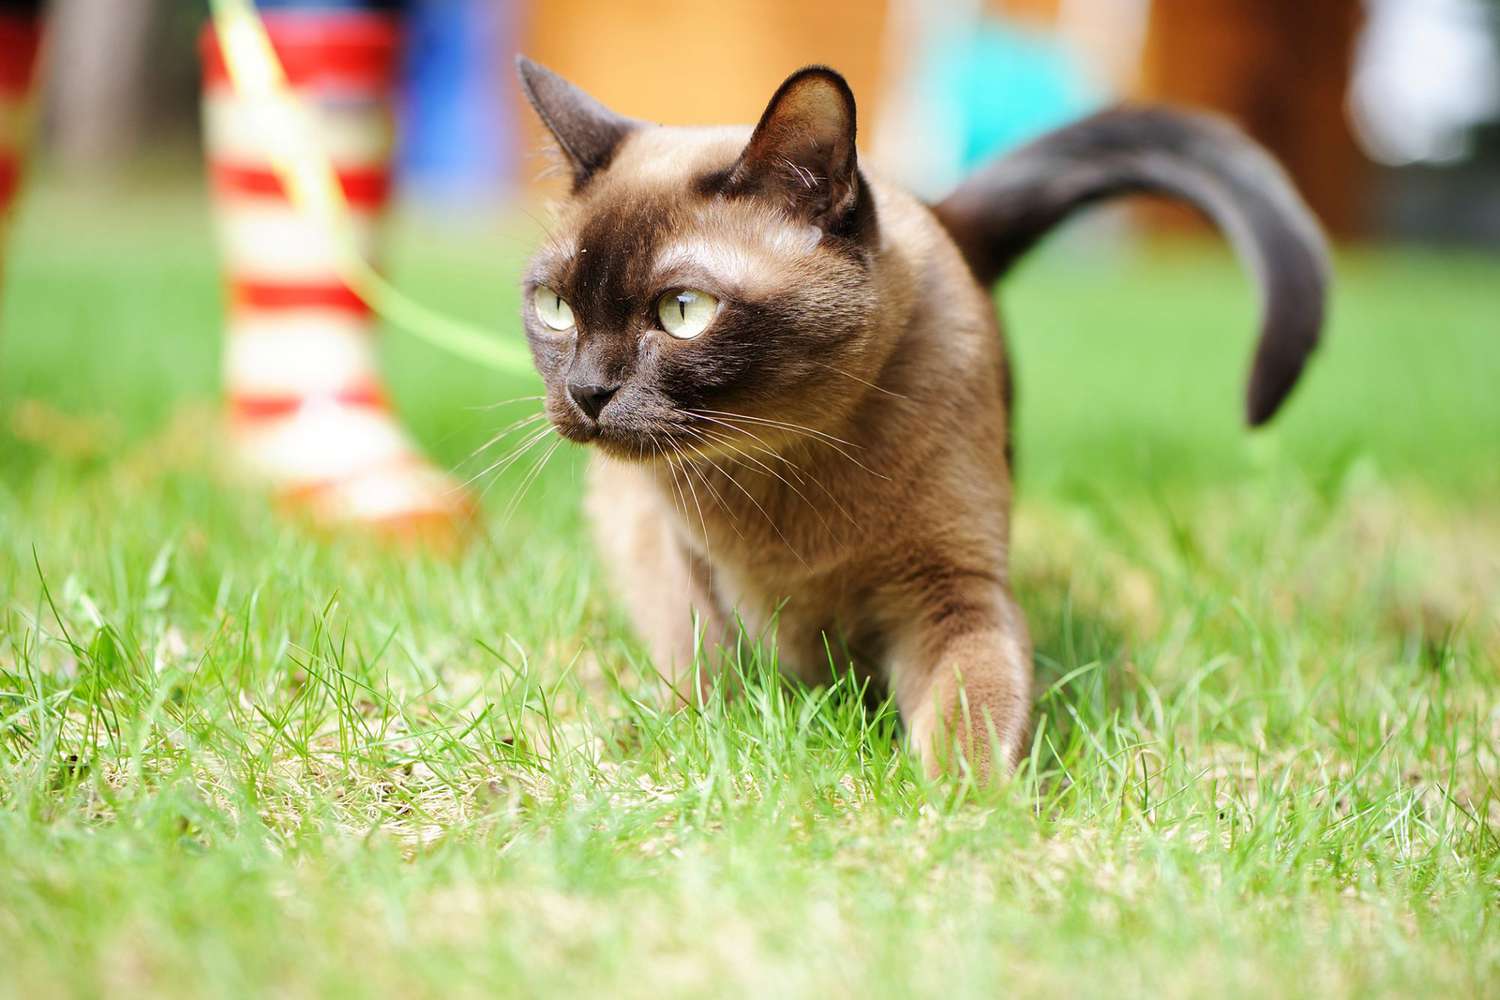 Burmese Cat Breed Information & Characteristics | Daily Paws